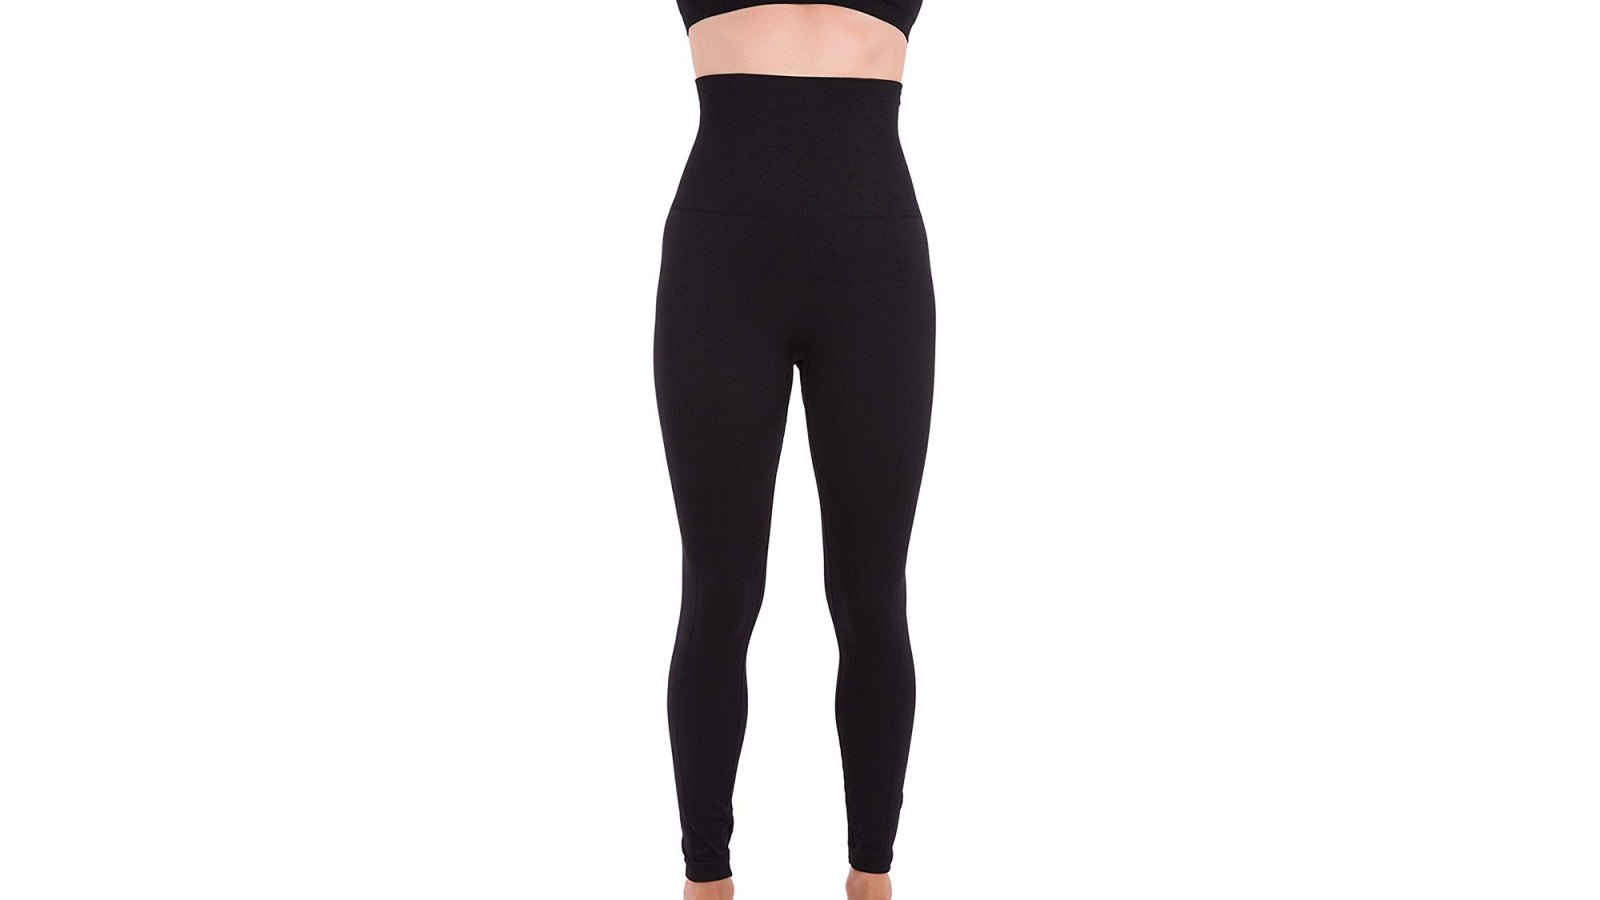 Aerie - We're obsessed with black leggings! Thanks to new crackle